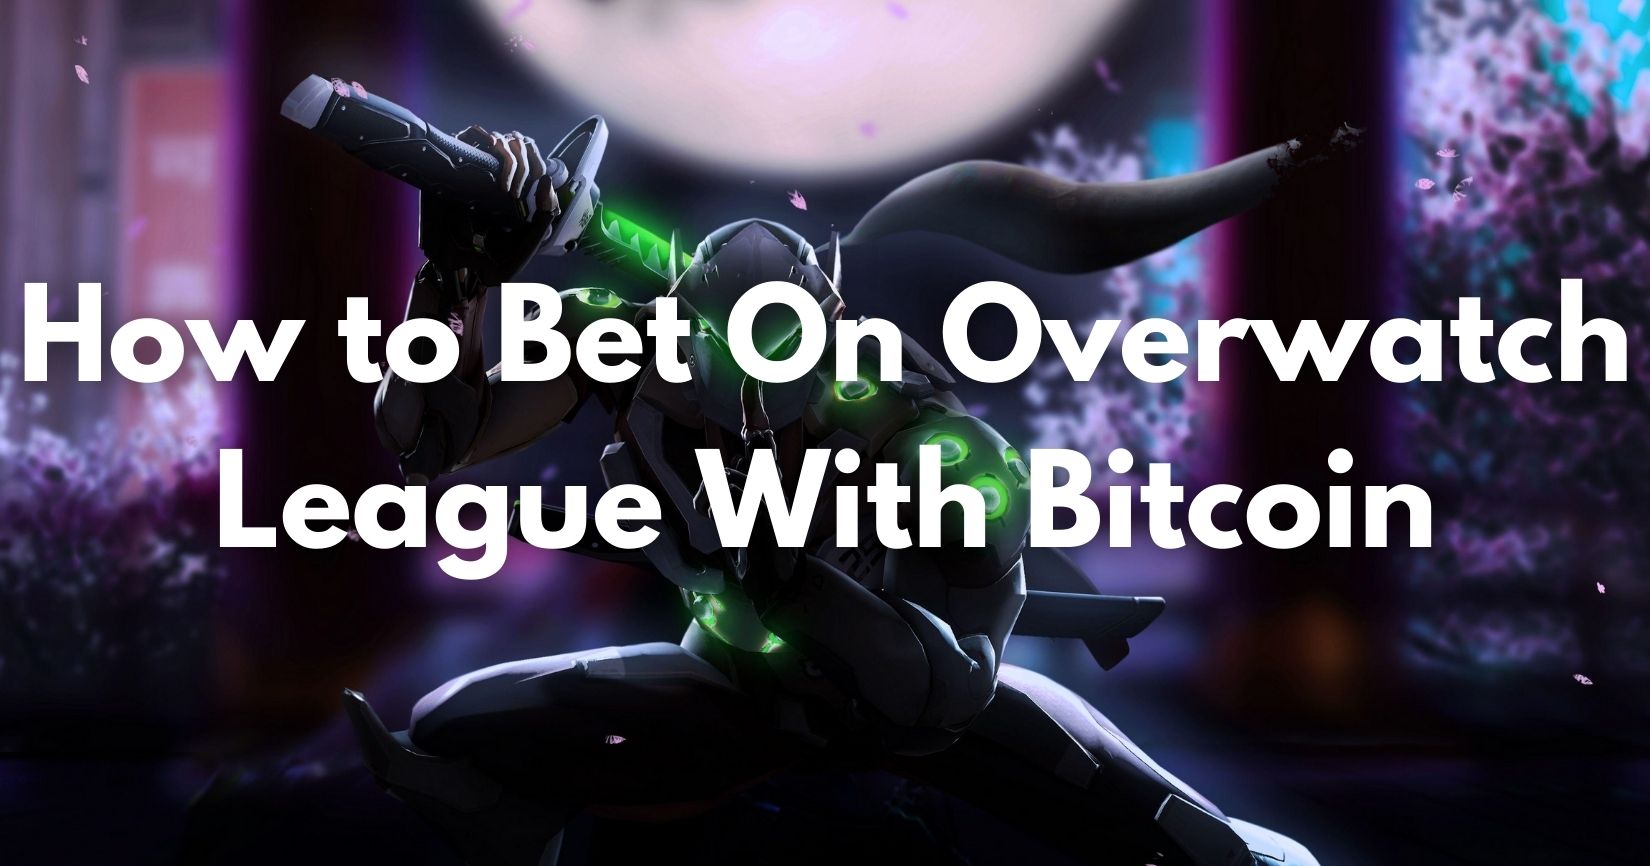 How to Bet On Overwatch League With Bitcoin